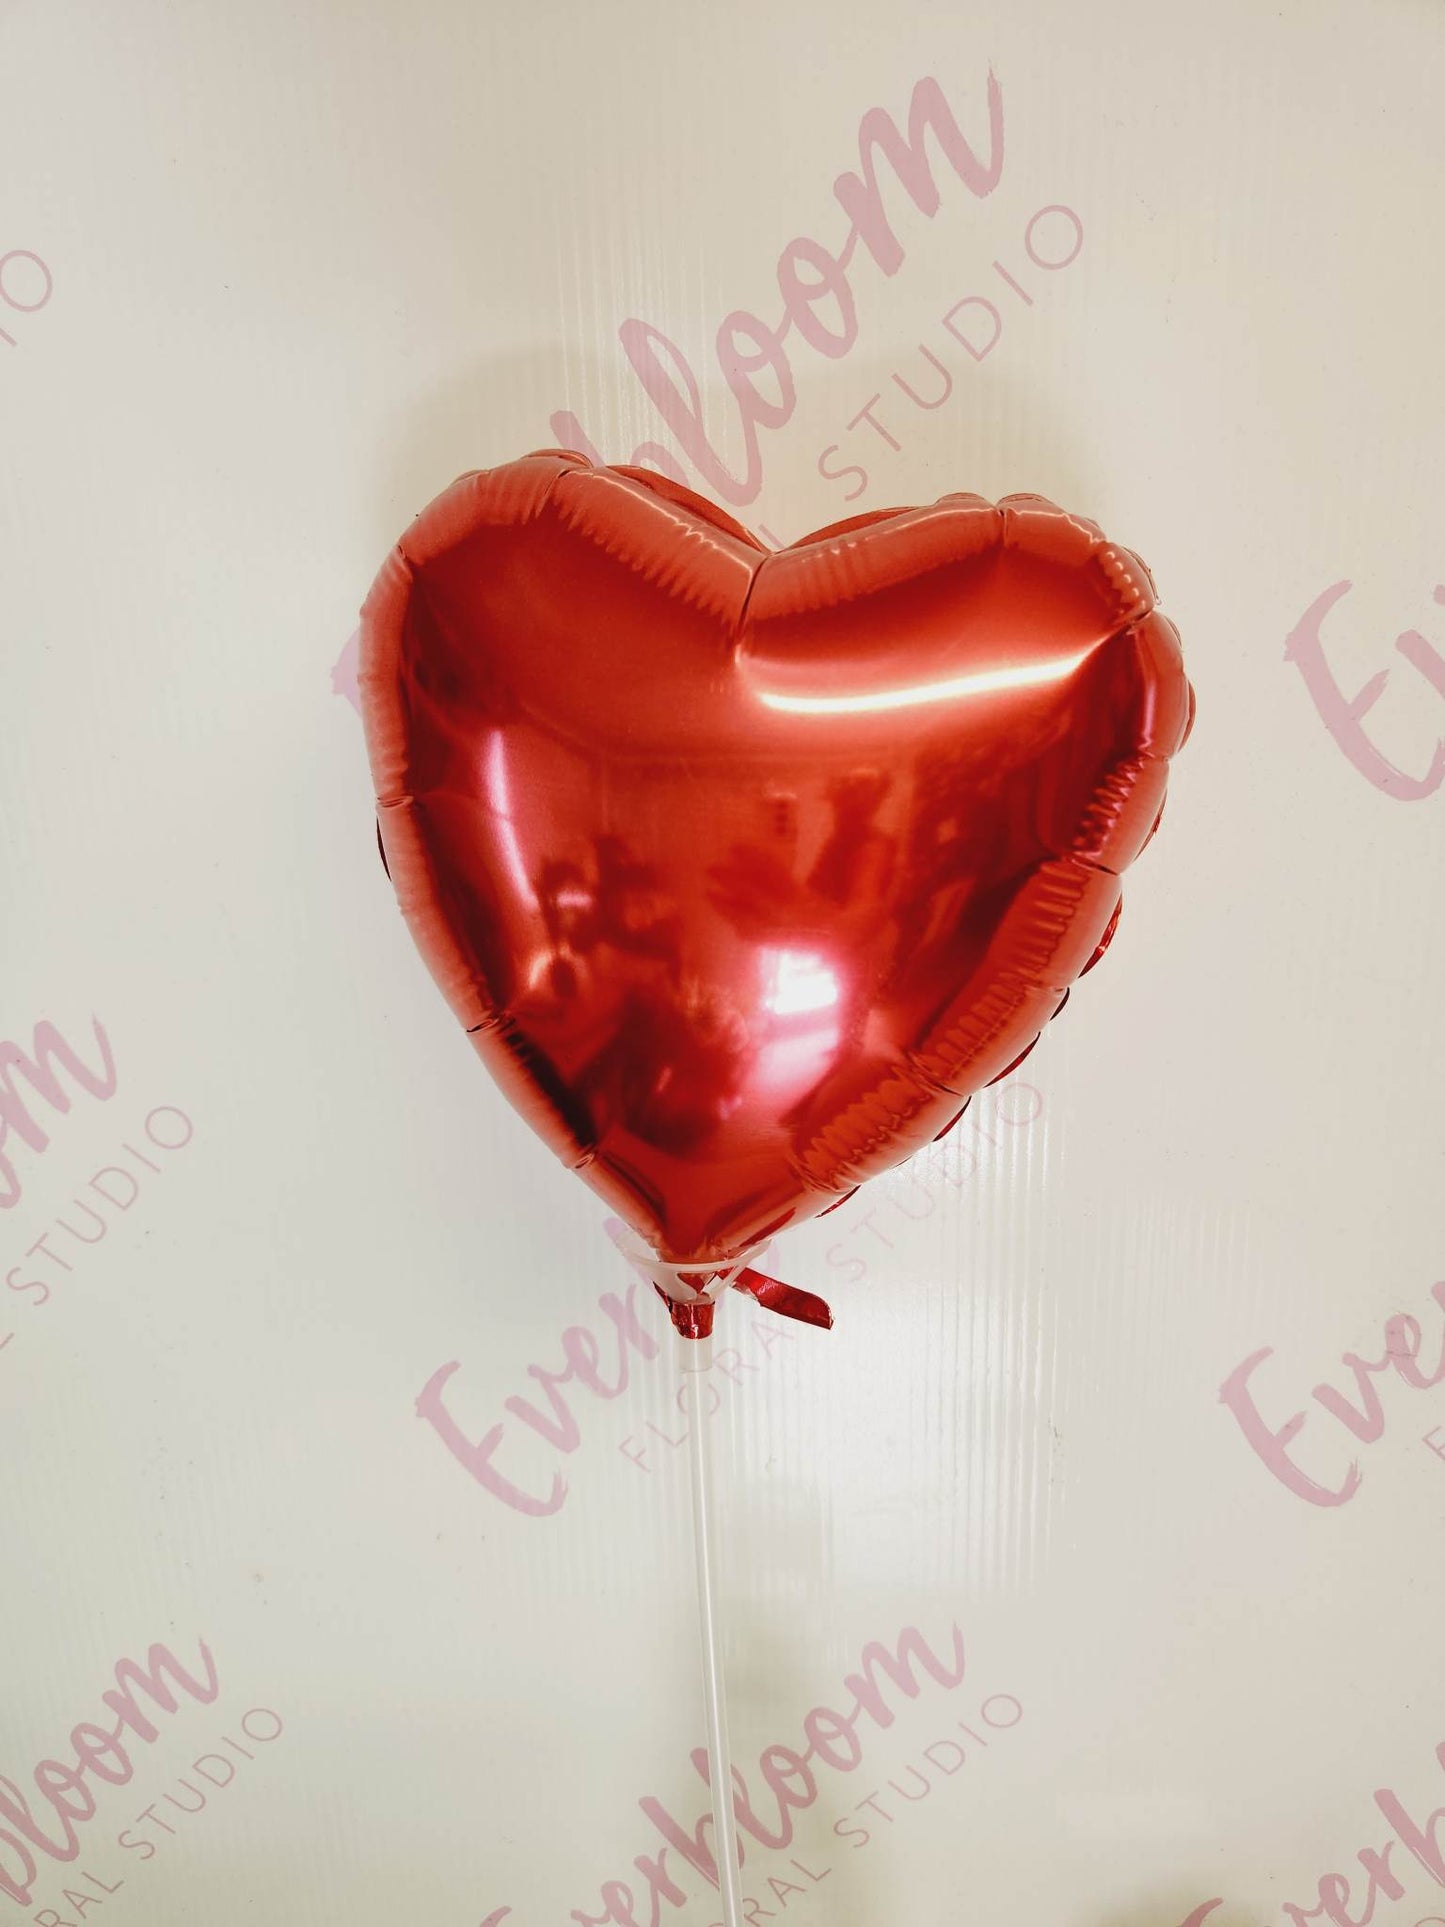 Heart balloons air filled, Mount Maunganui Florist - Everbloom floral studio